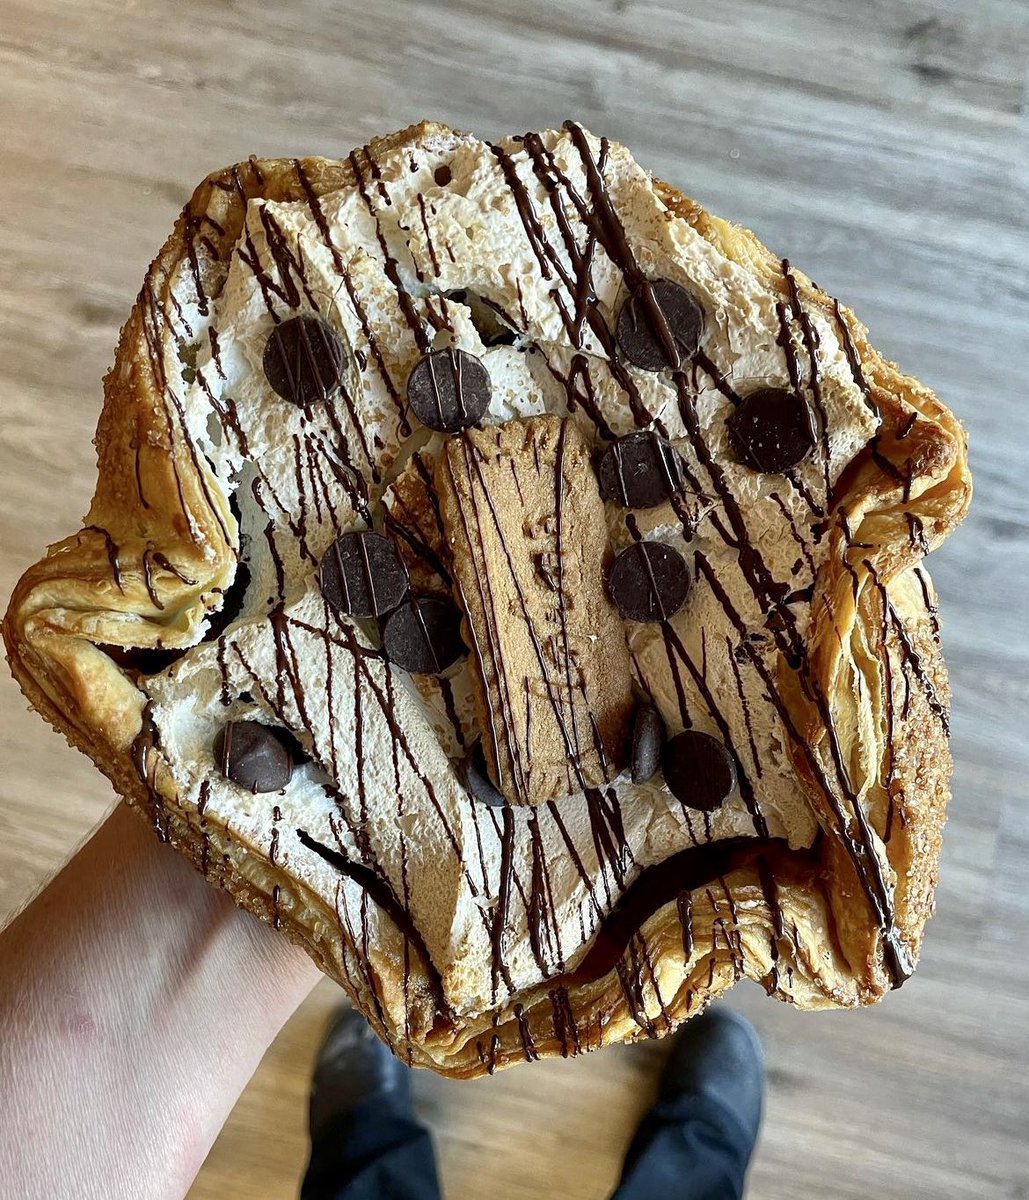 OMG! They went to Deb’s! ♥️

Tell them you love them with a S’mores Galette! 🥰

#artisan #baked #smores #valentines #pastry #food #love #onthetable #f52grams #thebakefeed #feedfeed #diamonds #smalltown #bakery #frederickeats #frederickfoodie #middletownmd #bodybydebs